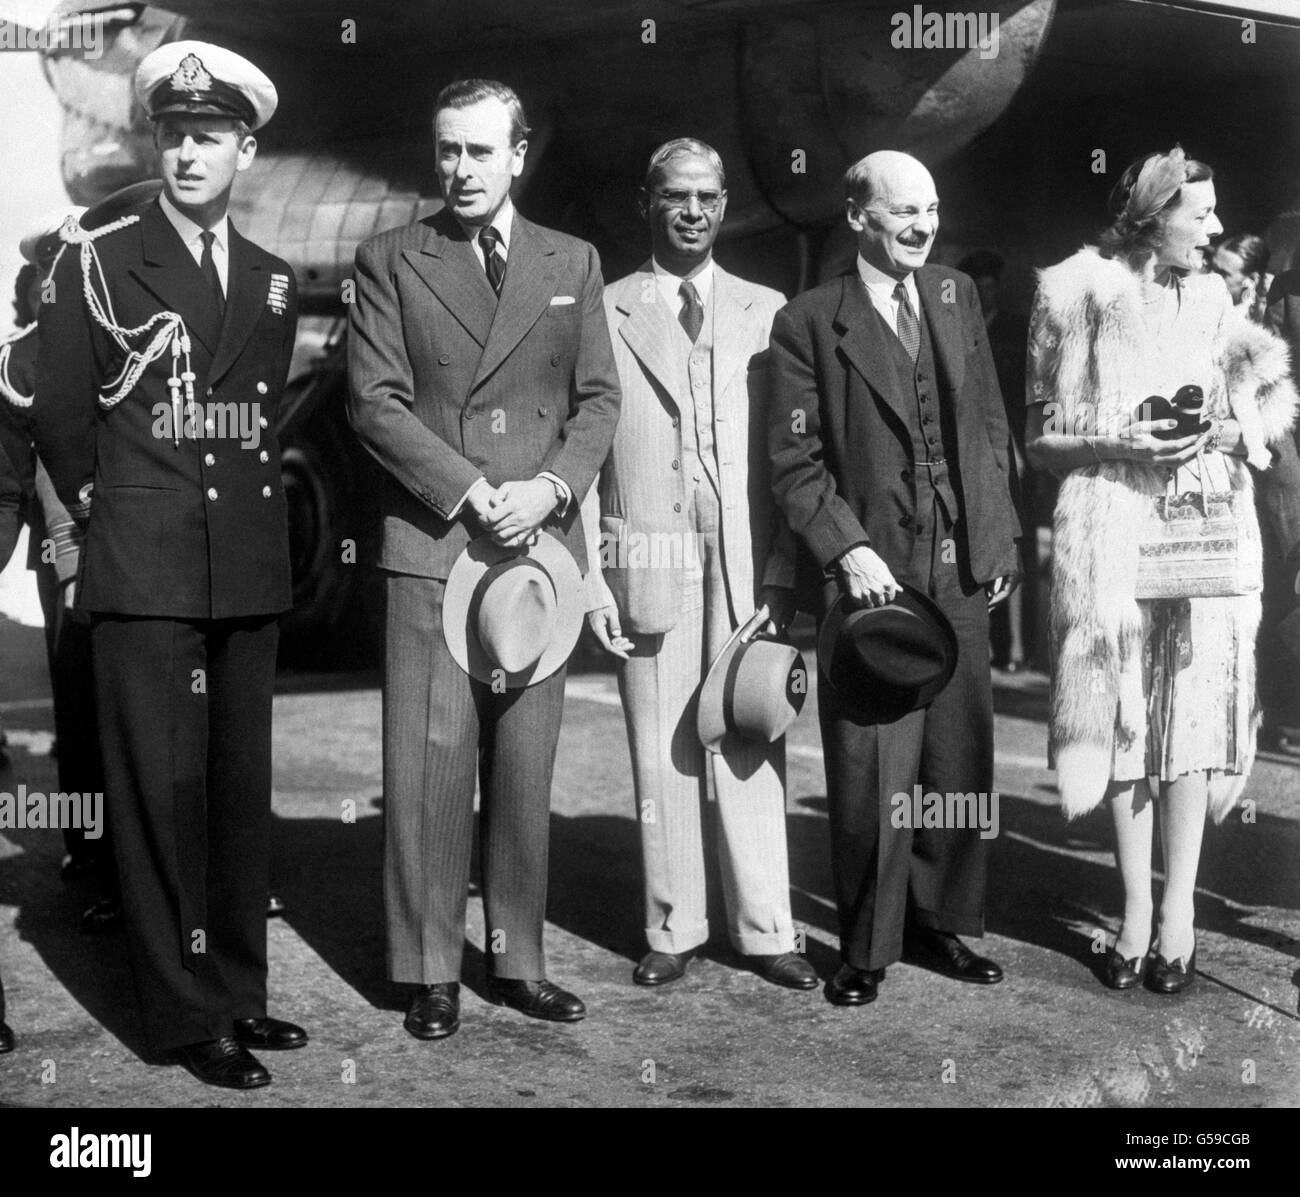 Arriving at Northolt Aerodrome from India is Lord Louis Mountbatten, accompanied by his wife and daughter, Pamela. Lord Louis has completed his office as the first and last British Governor General of the Dominion of India. From left HRH The Duke of Edinburgh; Lord Louis Mountbatten, Indian Finance Minister R. K. Shanmukham Chetty, British Prime Minister Clement Attlee and Lady Mountbatten. Stock Photo